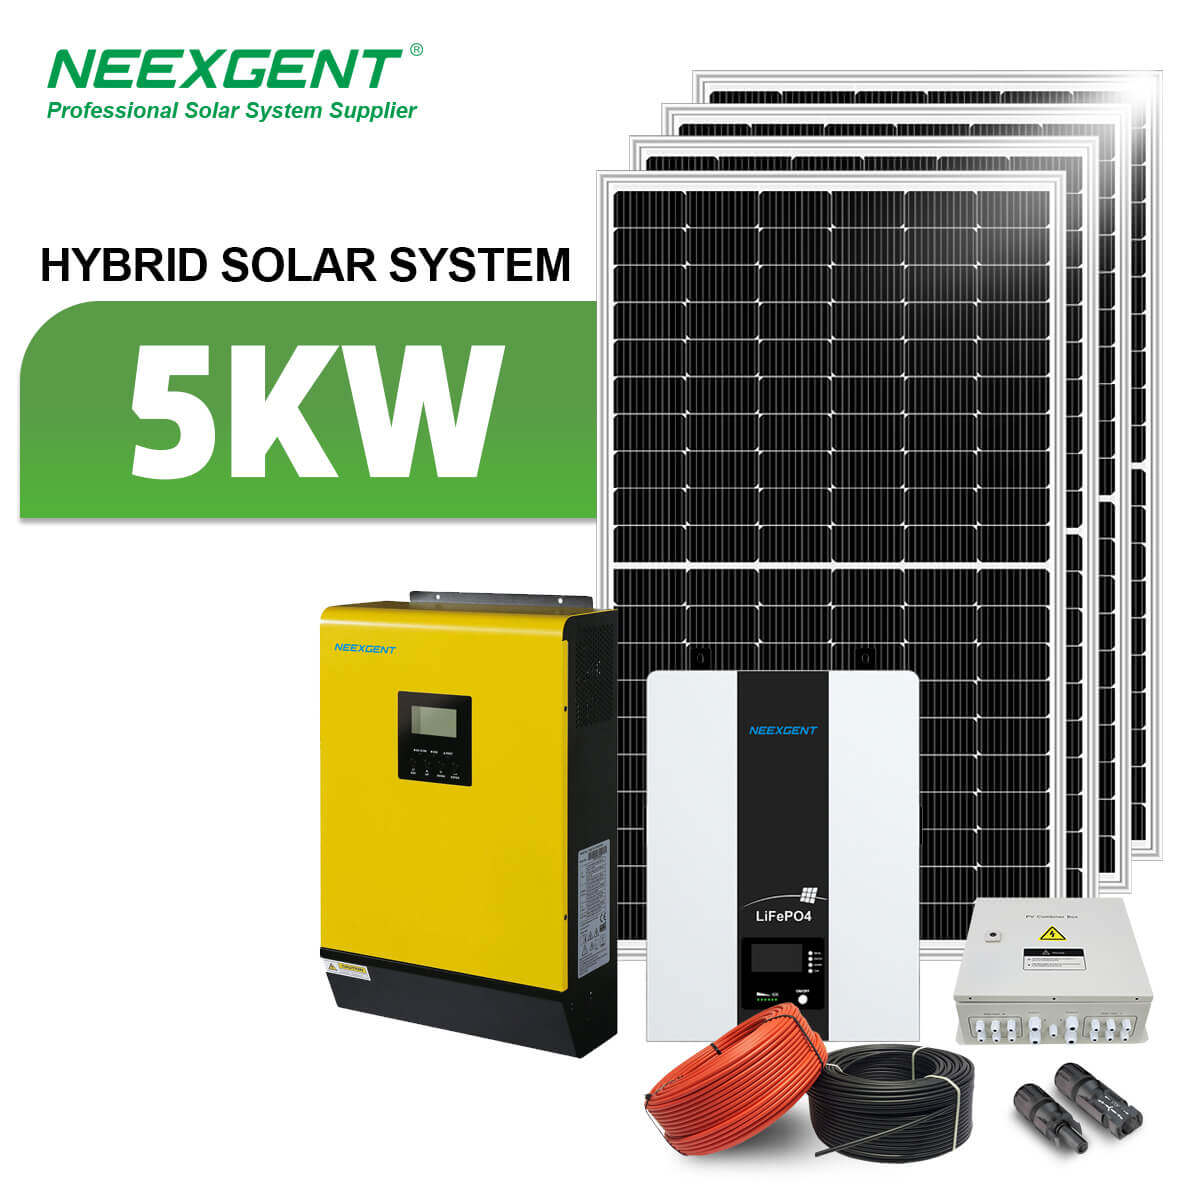 Neexgent Complete Set Solar Energy System 5kw Hybrid Solar System For Home